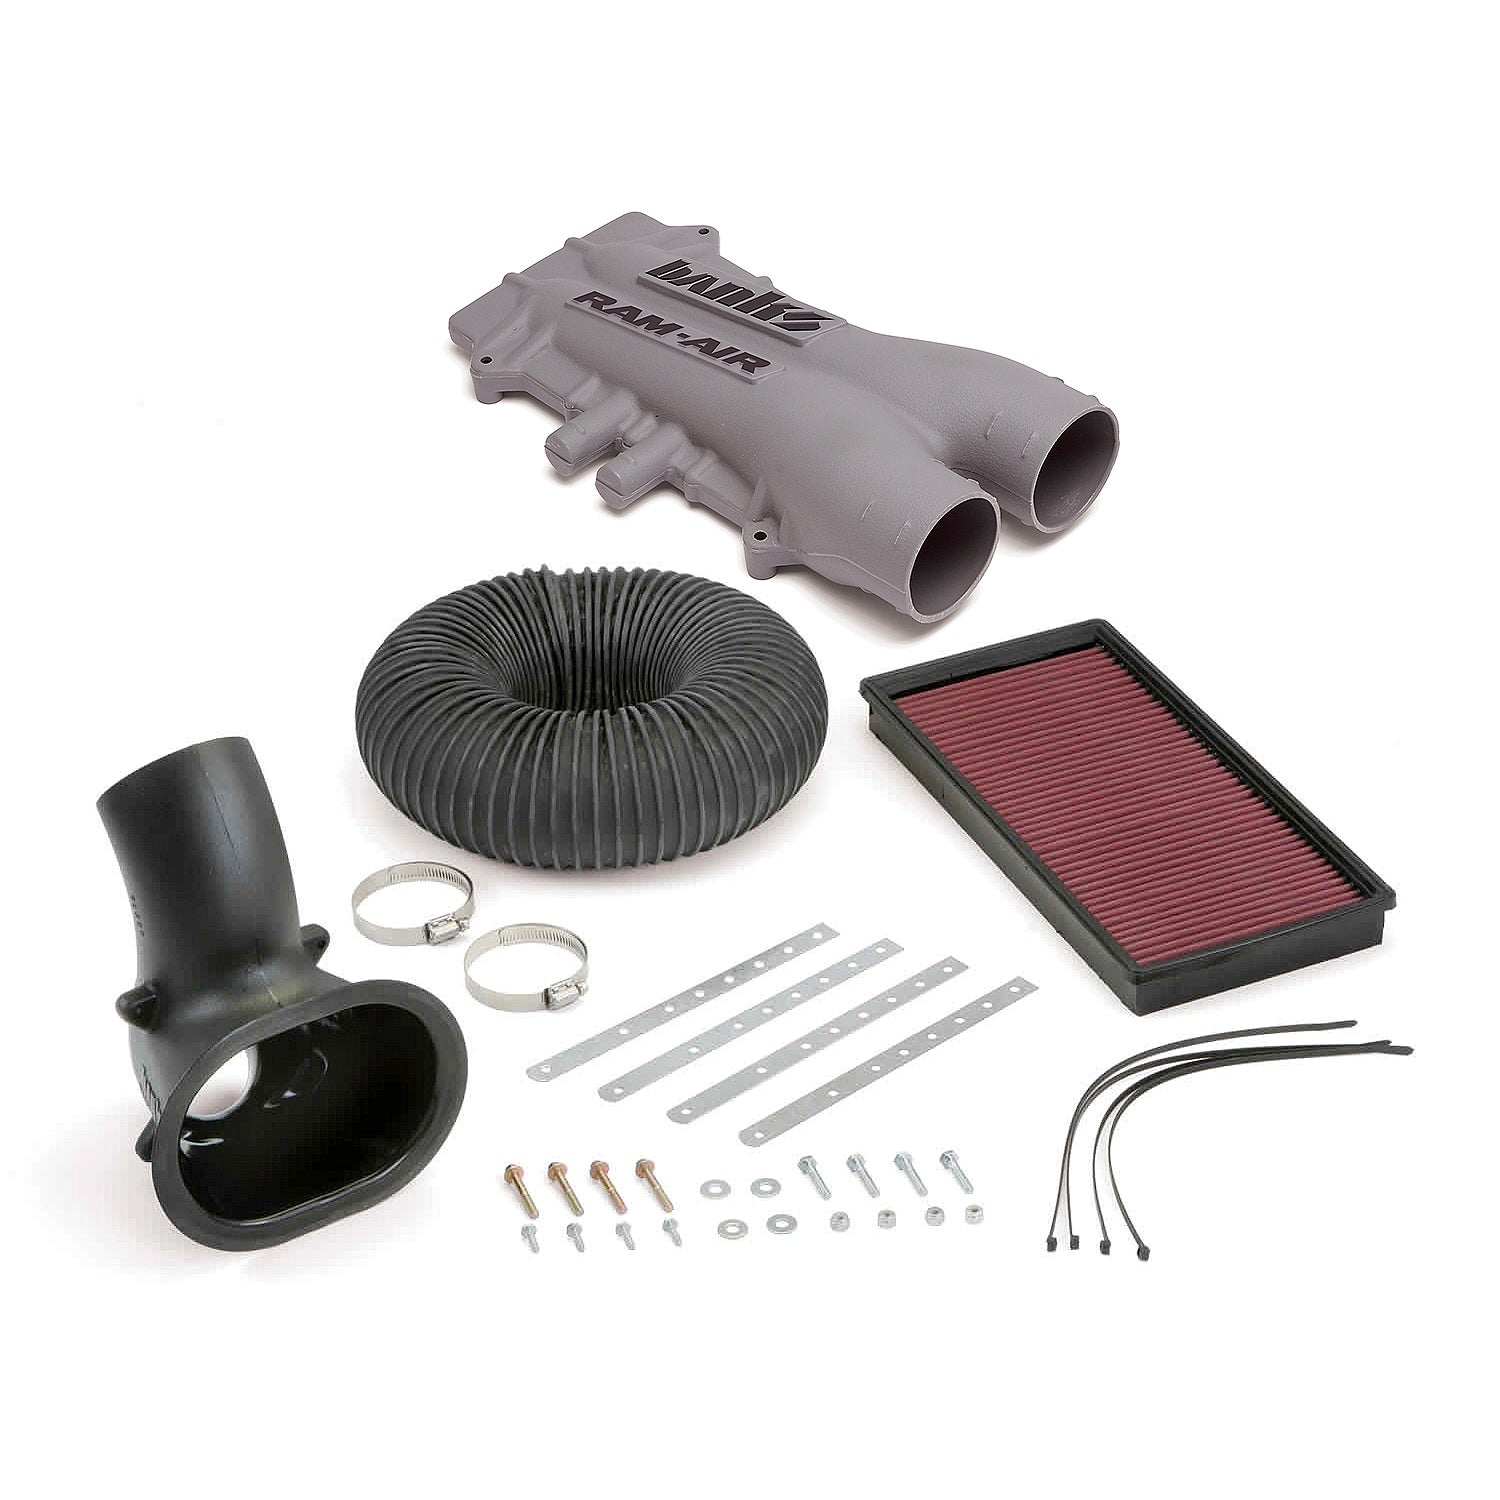 Banks Ram-Air intake for 7.5L Class A motor home